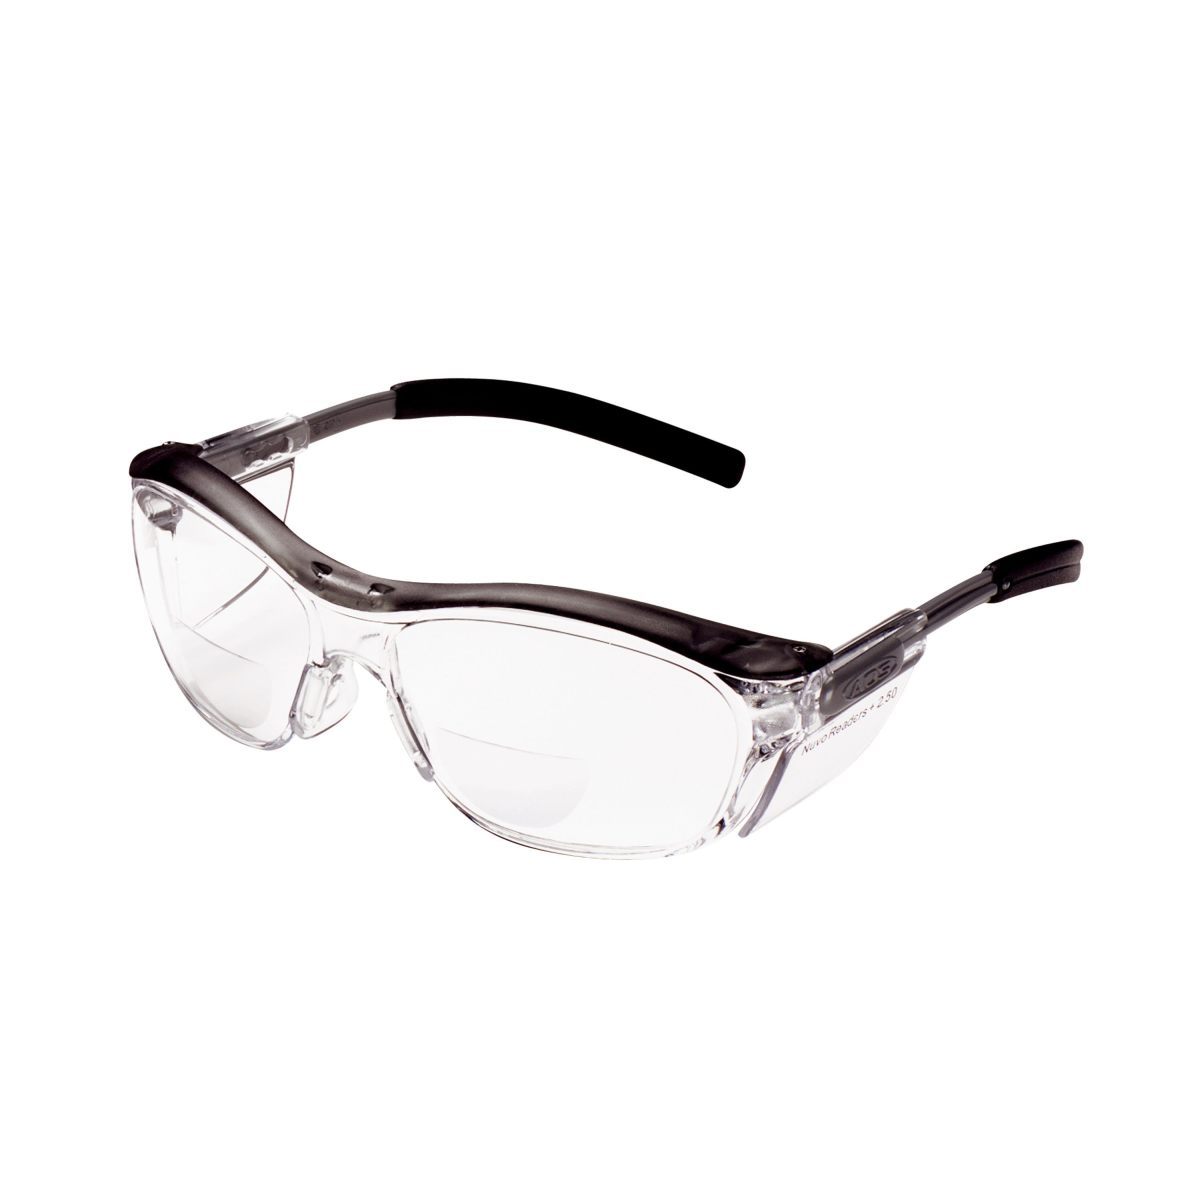 3M™ Nuvo™ Reader Protective Eyewear 11436-00000-20 Clear Lens, Gray Frame, +2.5 Diopter (Availability restrictions apply.)